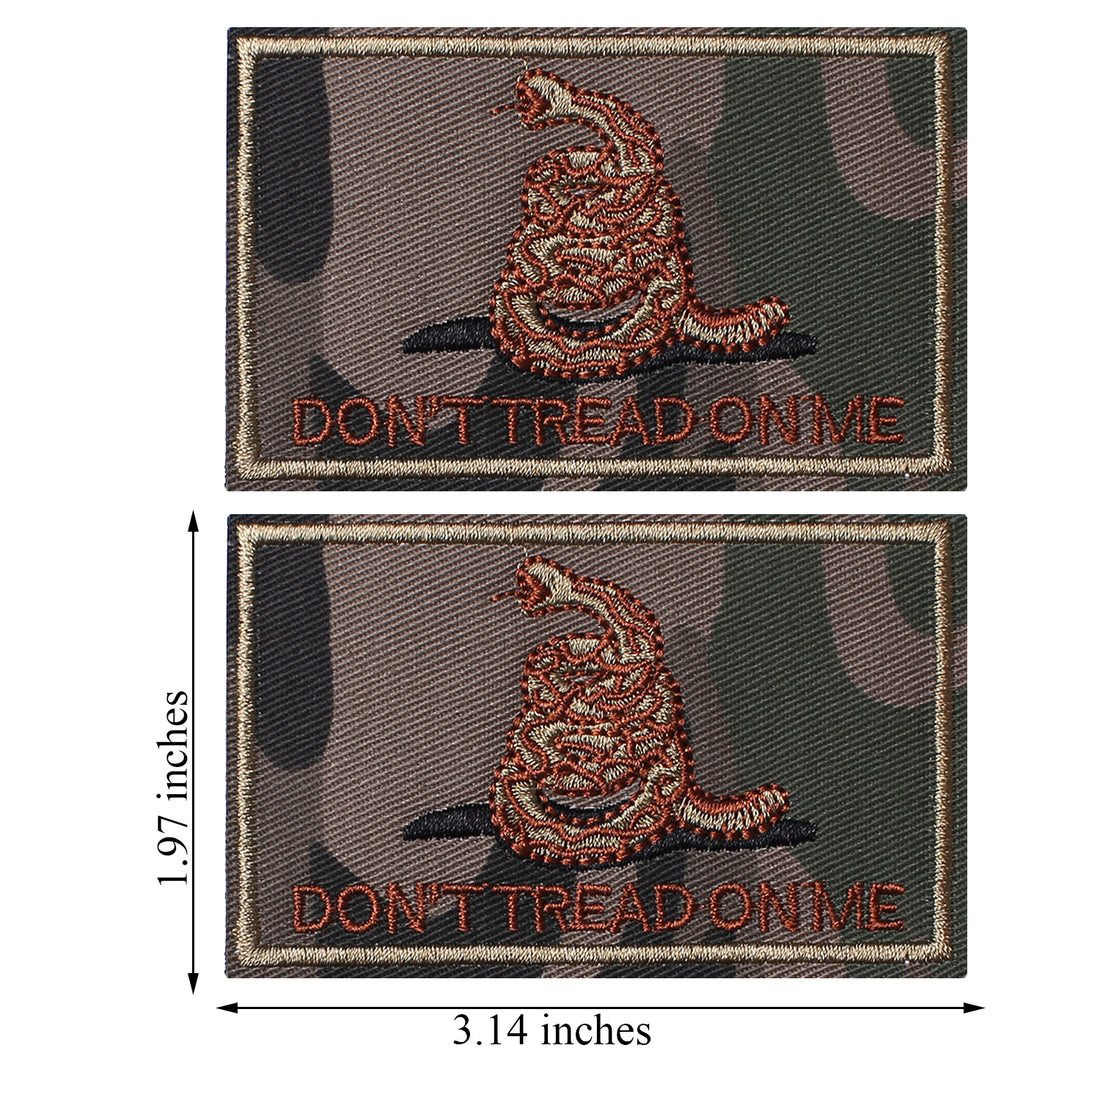 2 Pieces Don't Tread on Me Tactical Patch Military Morale Patch Ruins of the Green